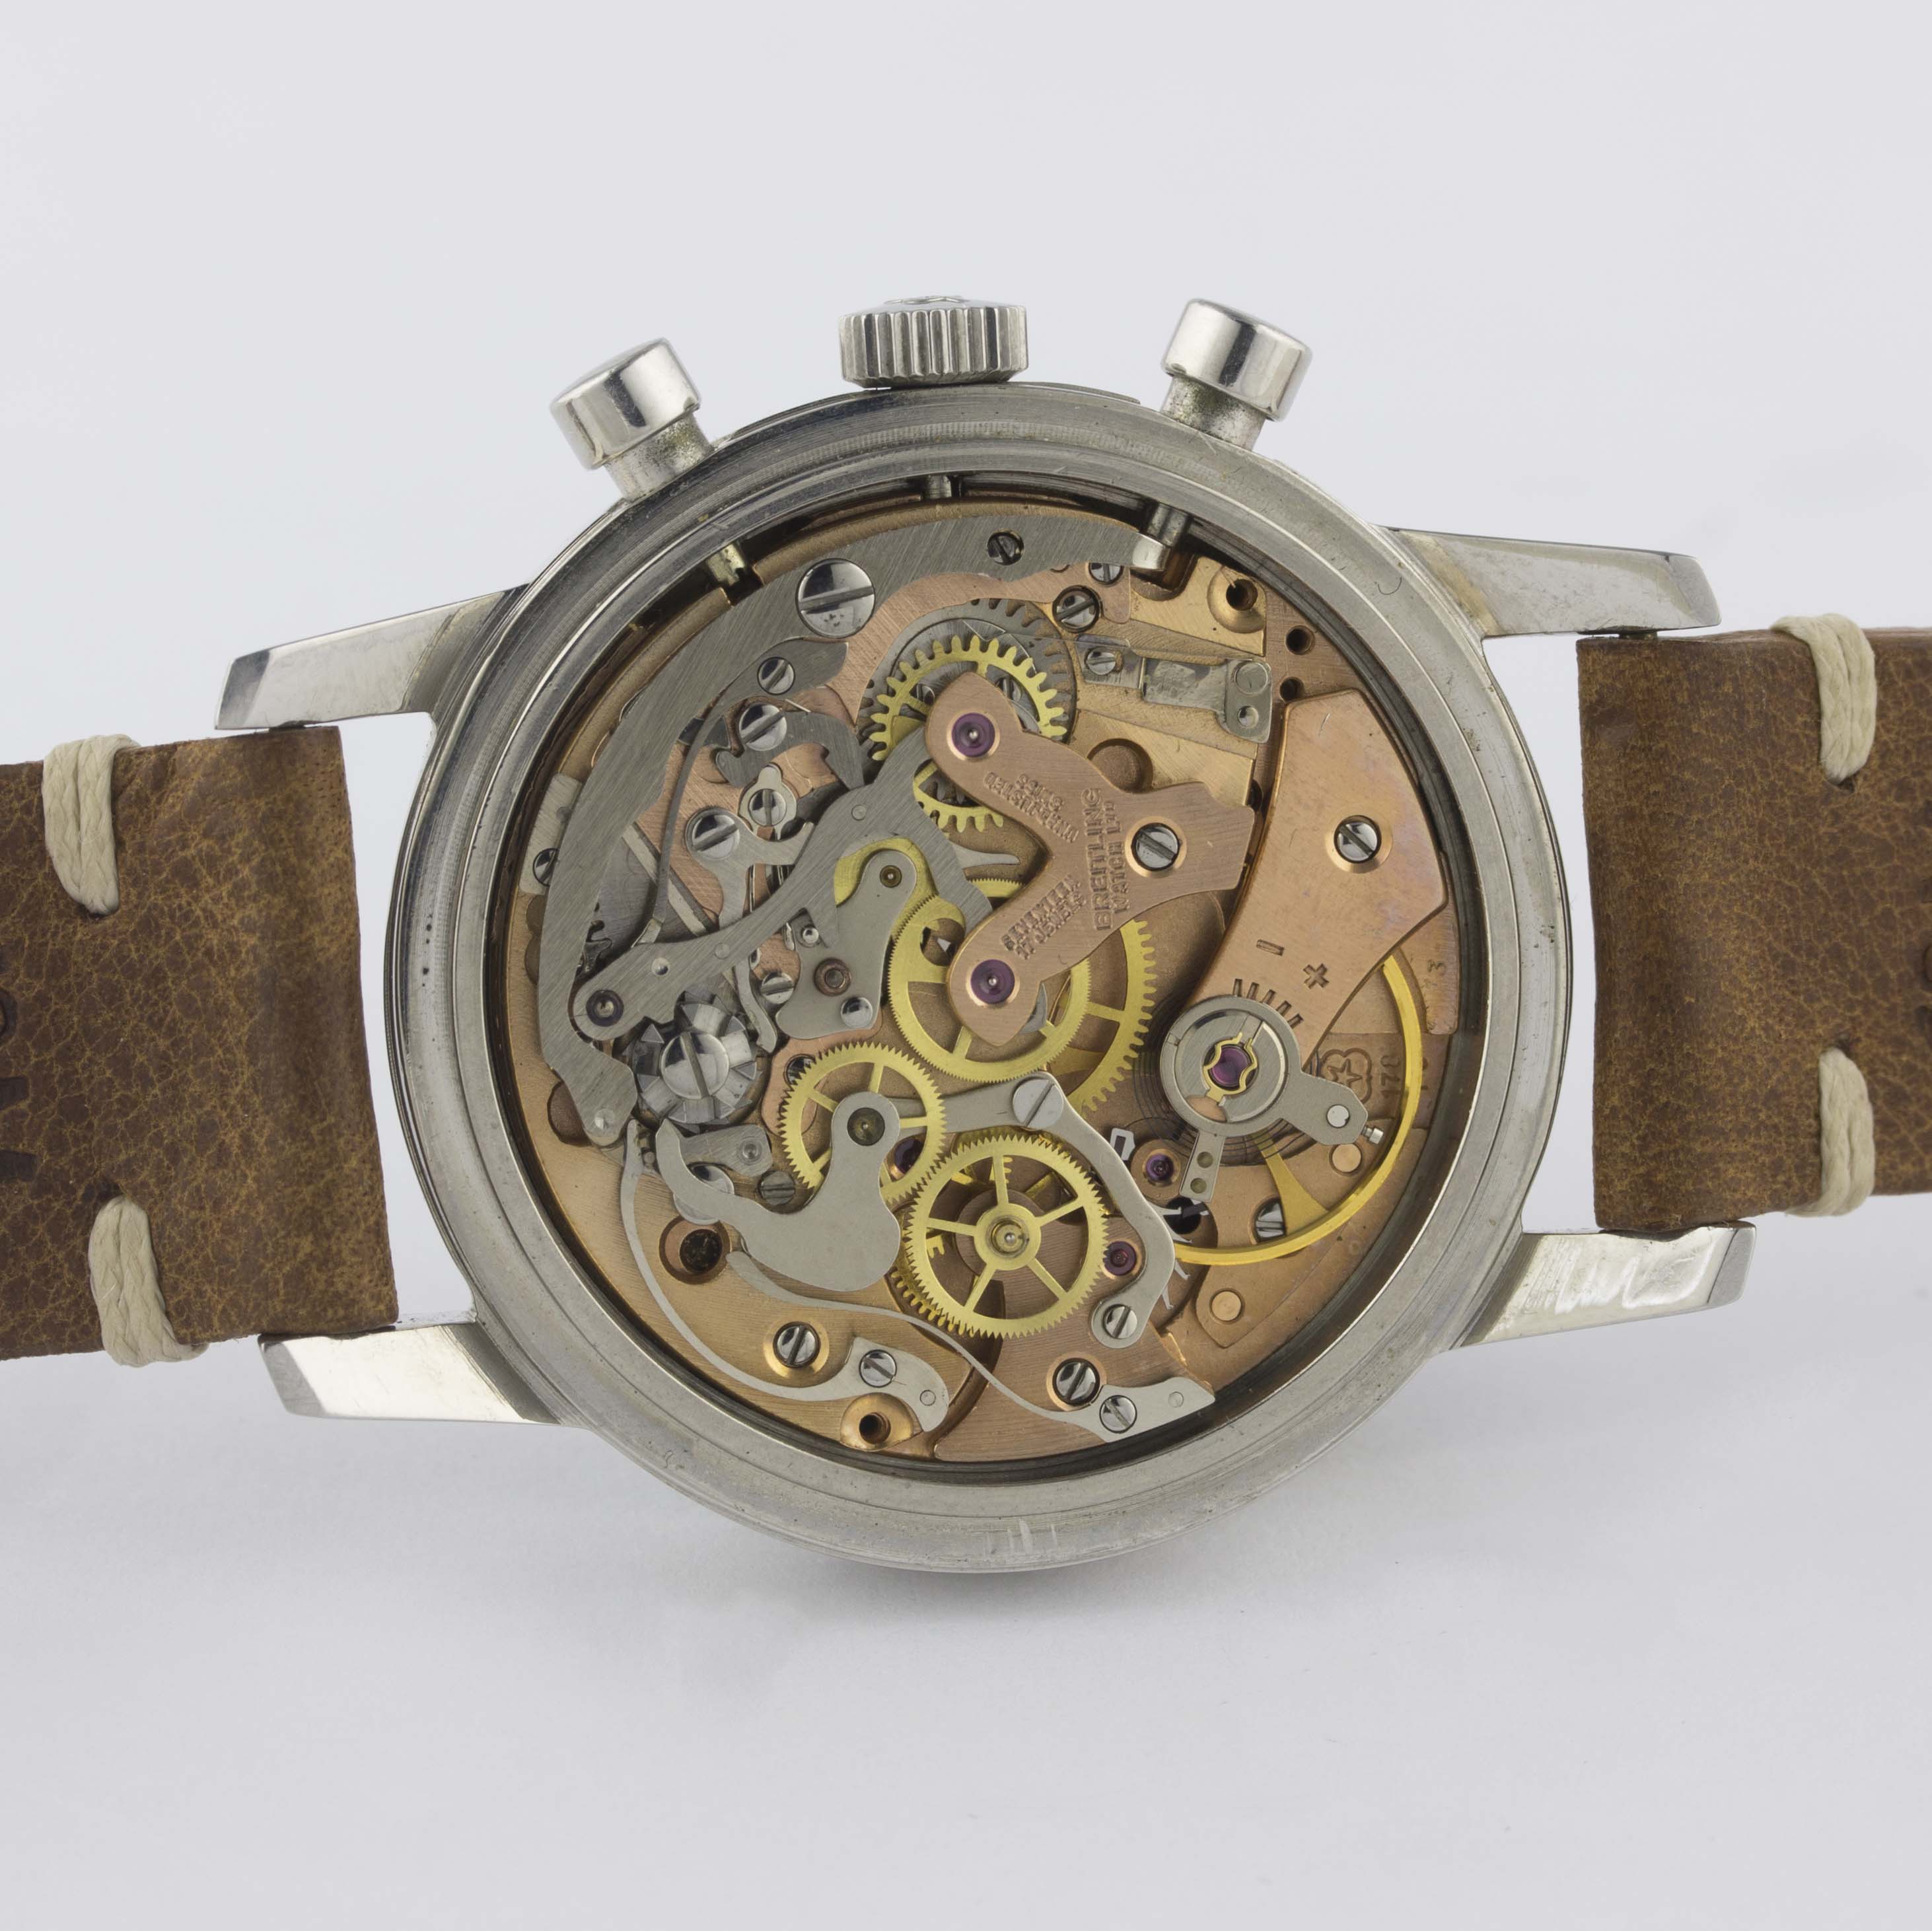 A RARE GENTLEMAN'S STAINLESS STEEL BREITLING TOP TIME CHRONOGRAPH WRIST WATCH CIRCA 1969, REF. 810 - Image 8 of 11